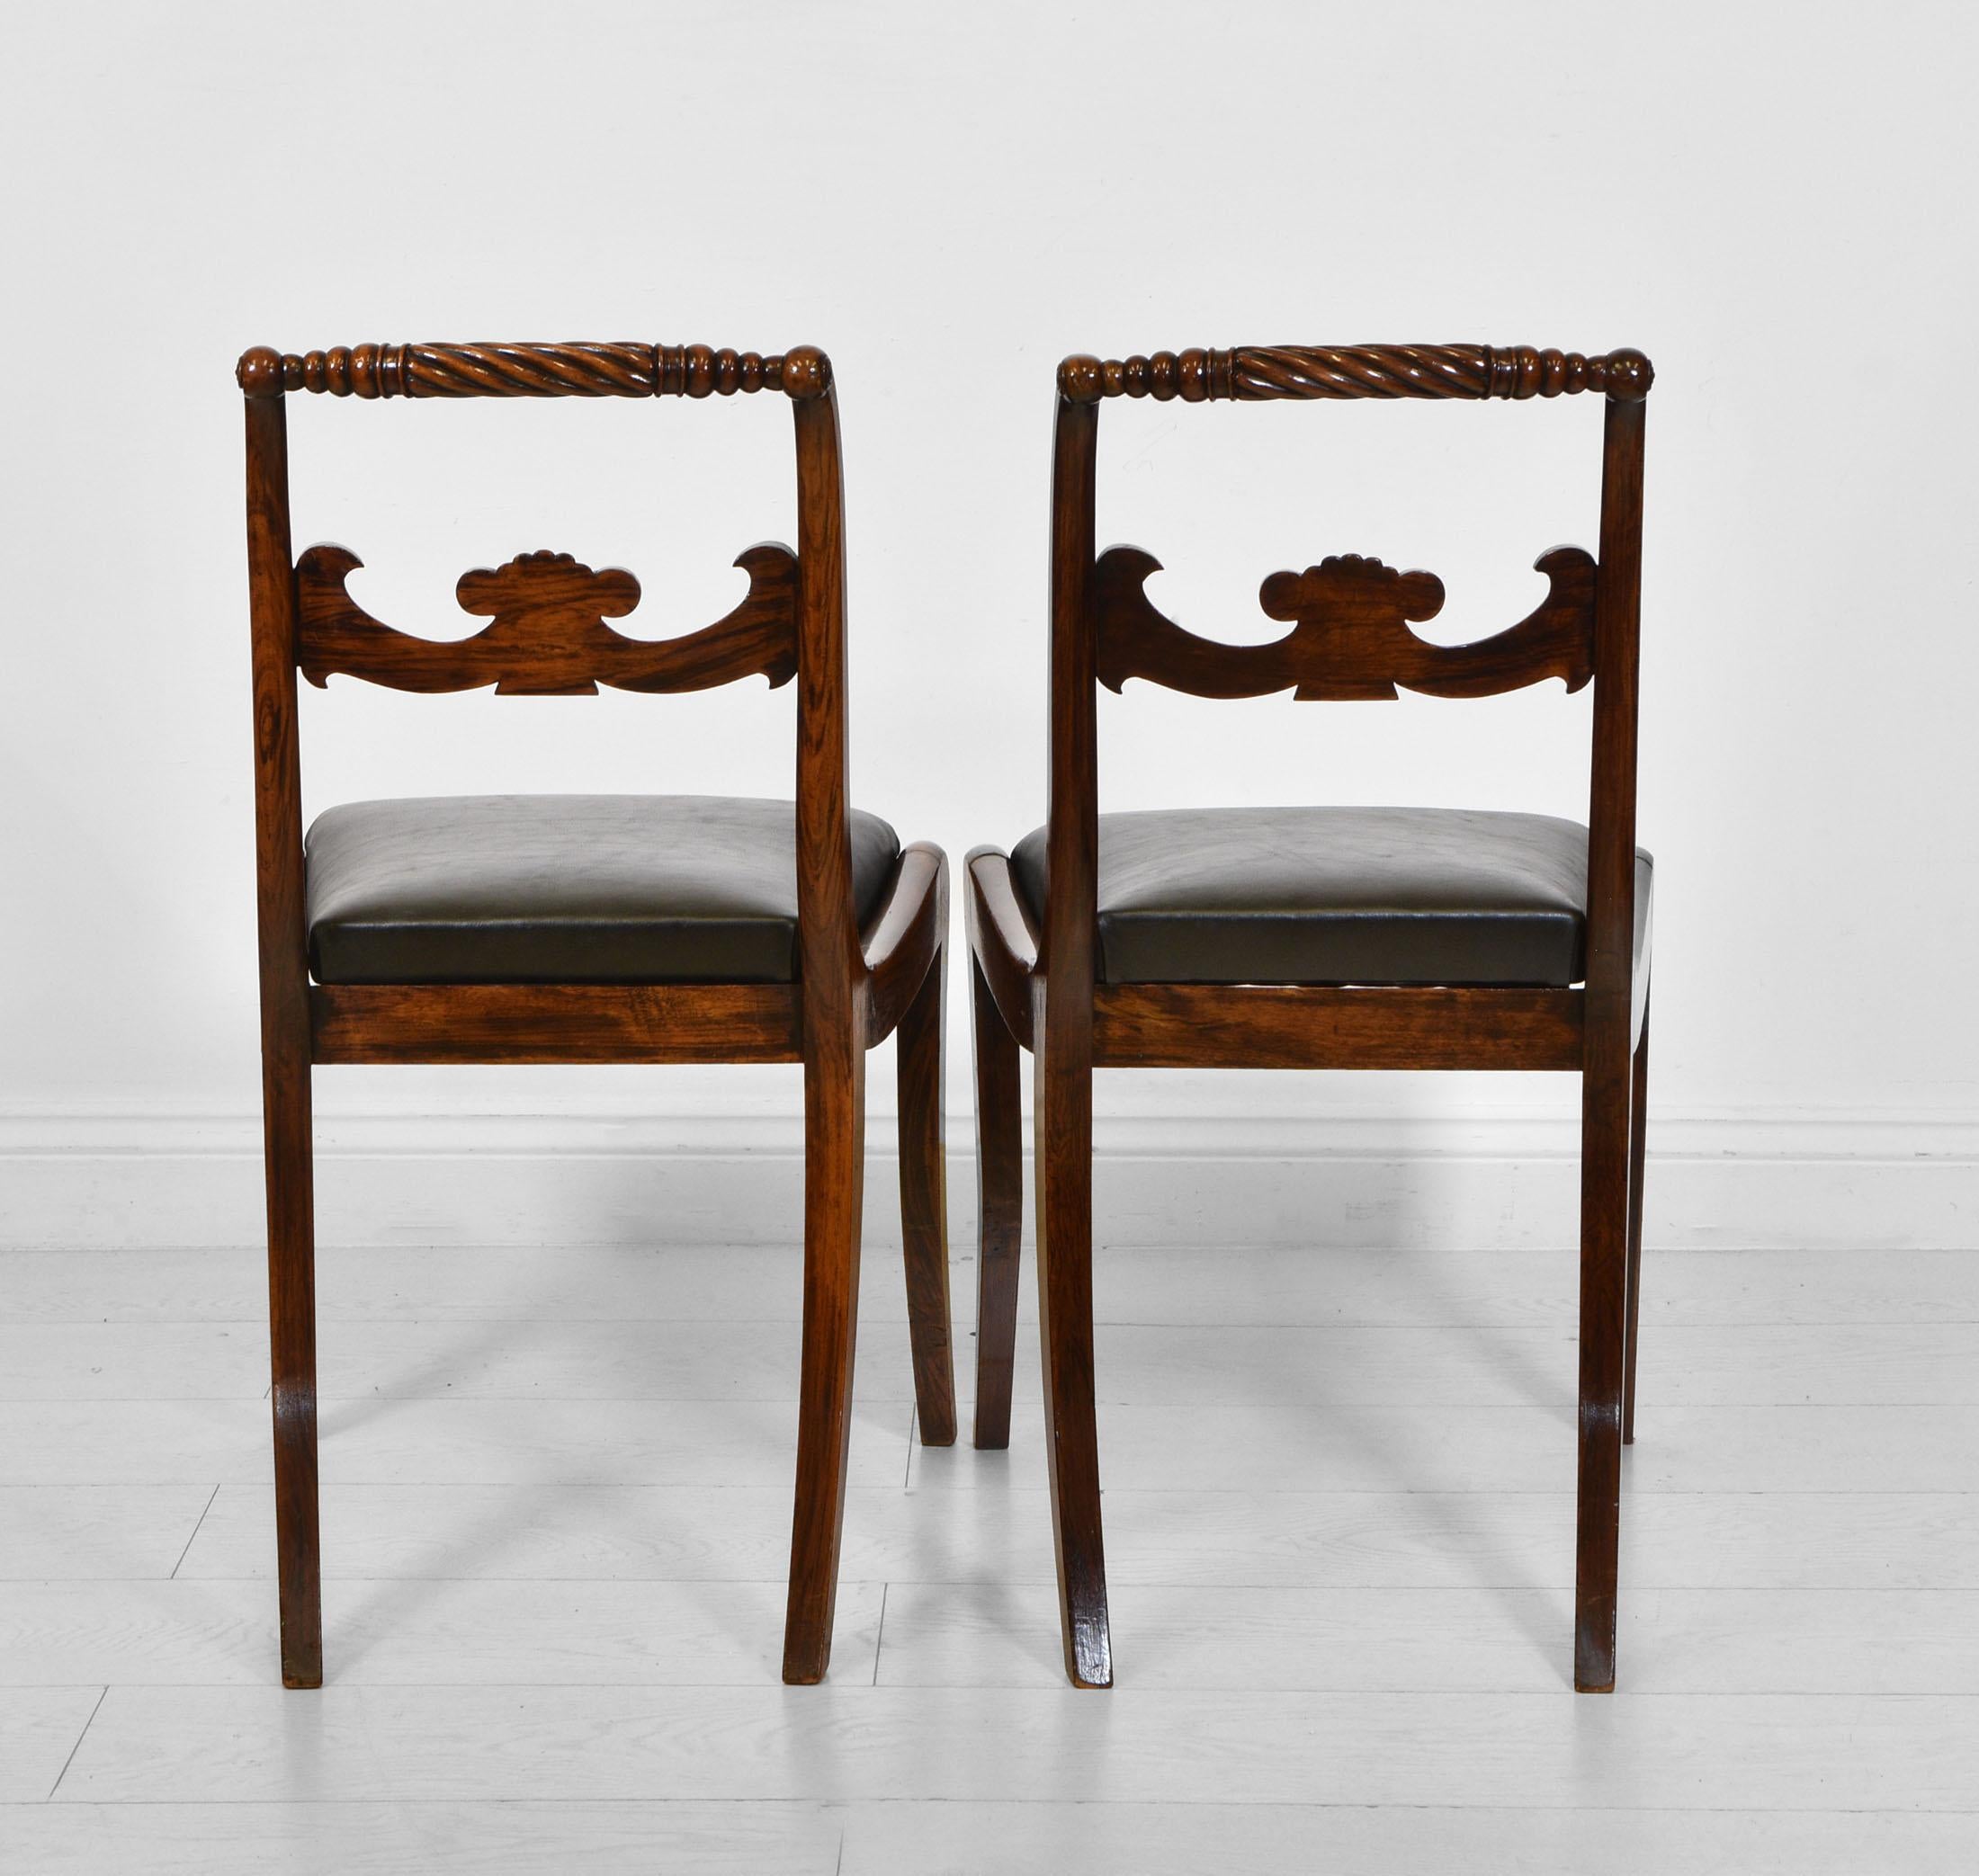 Pair Regency Simulated Rosewood & Leather Trafalgar Chairs, Circa 1820 For Sale 2